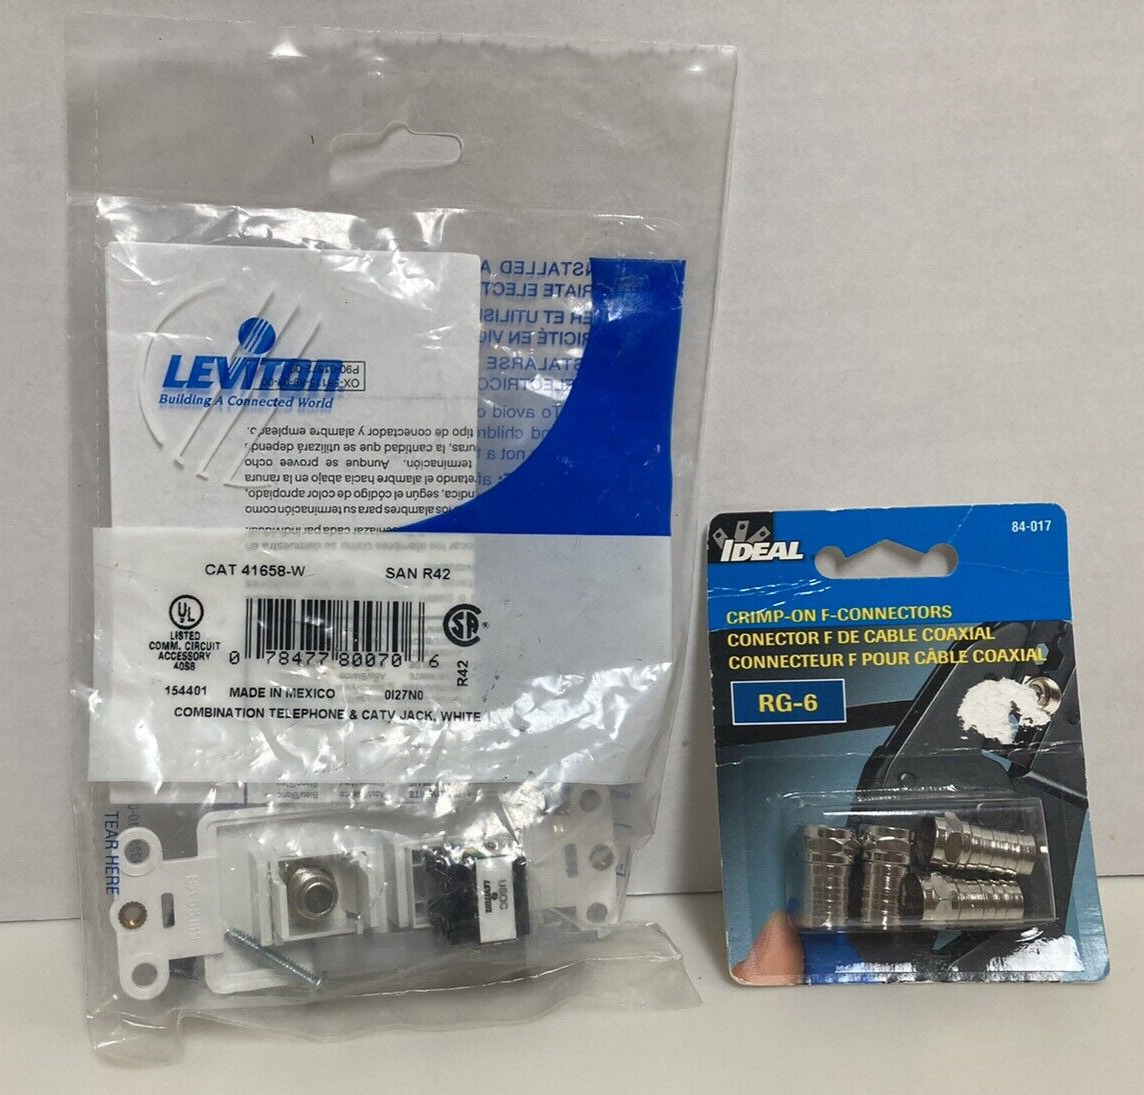 Leviton Combo Phone & CAT 5 Jack White and Ideal F- Connector 4 Pack New